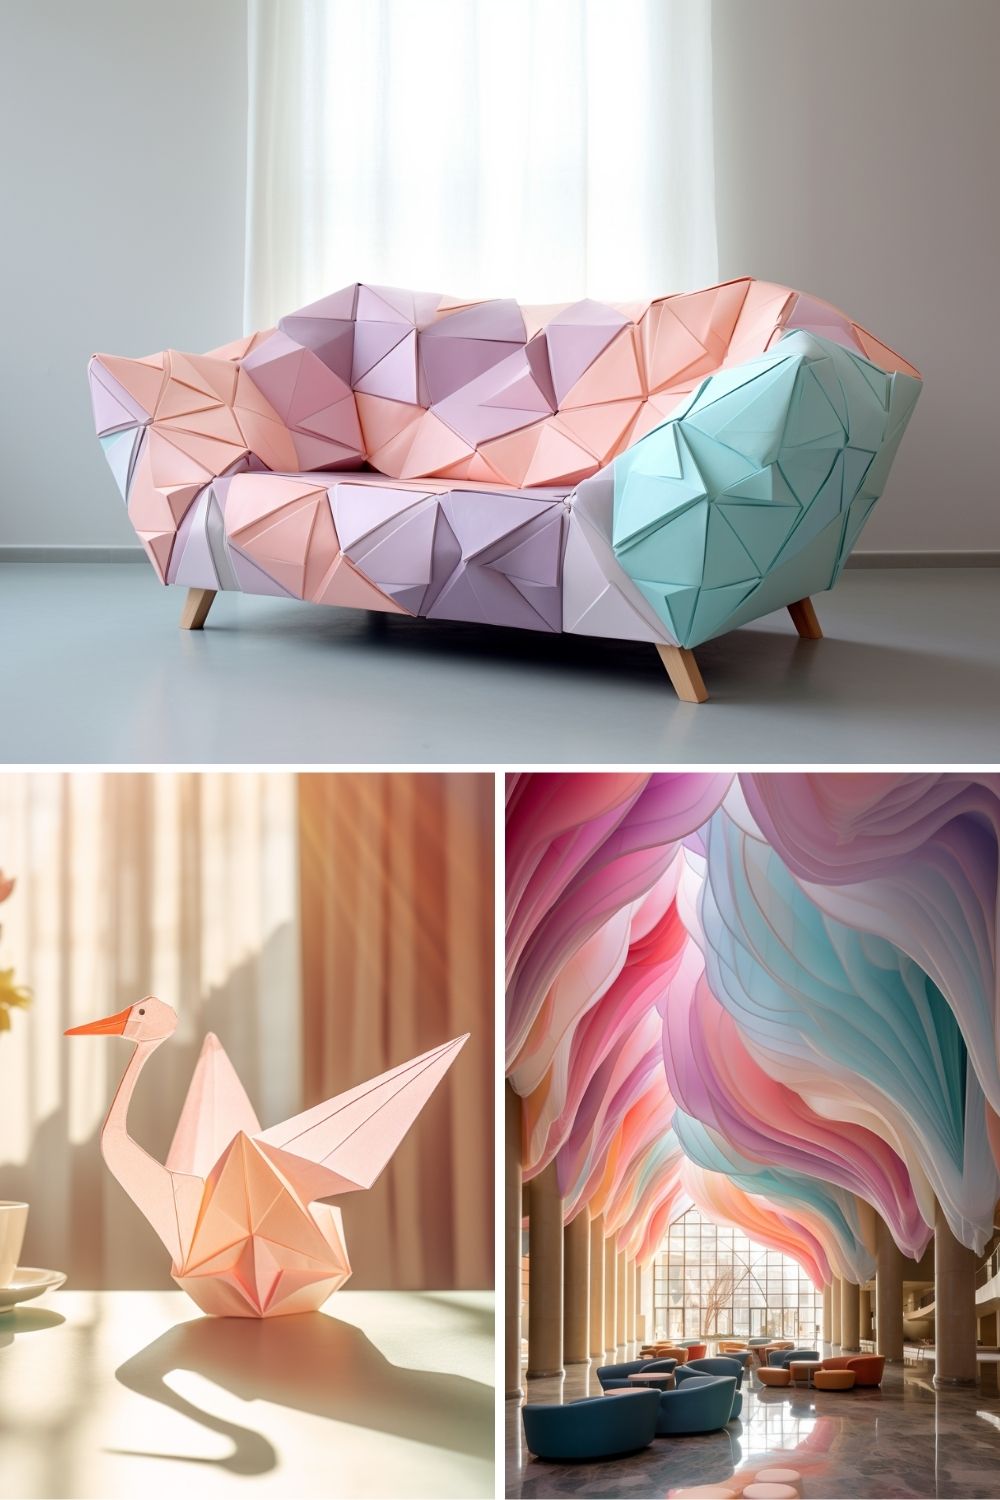 ORIGAMI ART - Best Creative Unique Midjourney Prompt Ideas To Spark Your Creativity - Sprinkle of AI Image Prompt Set 21